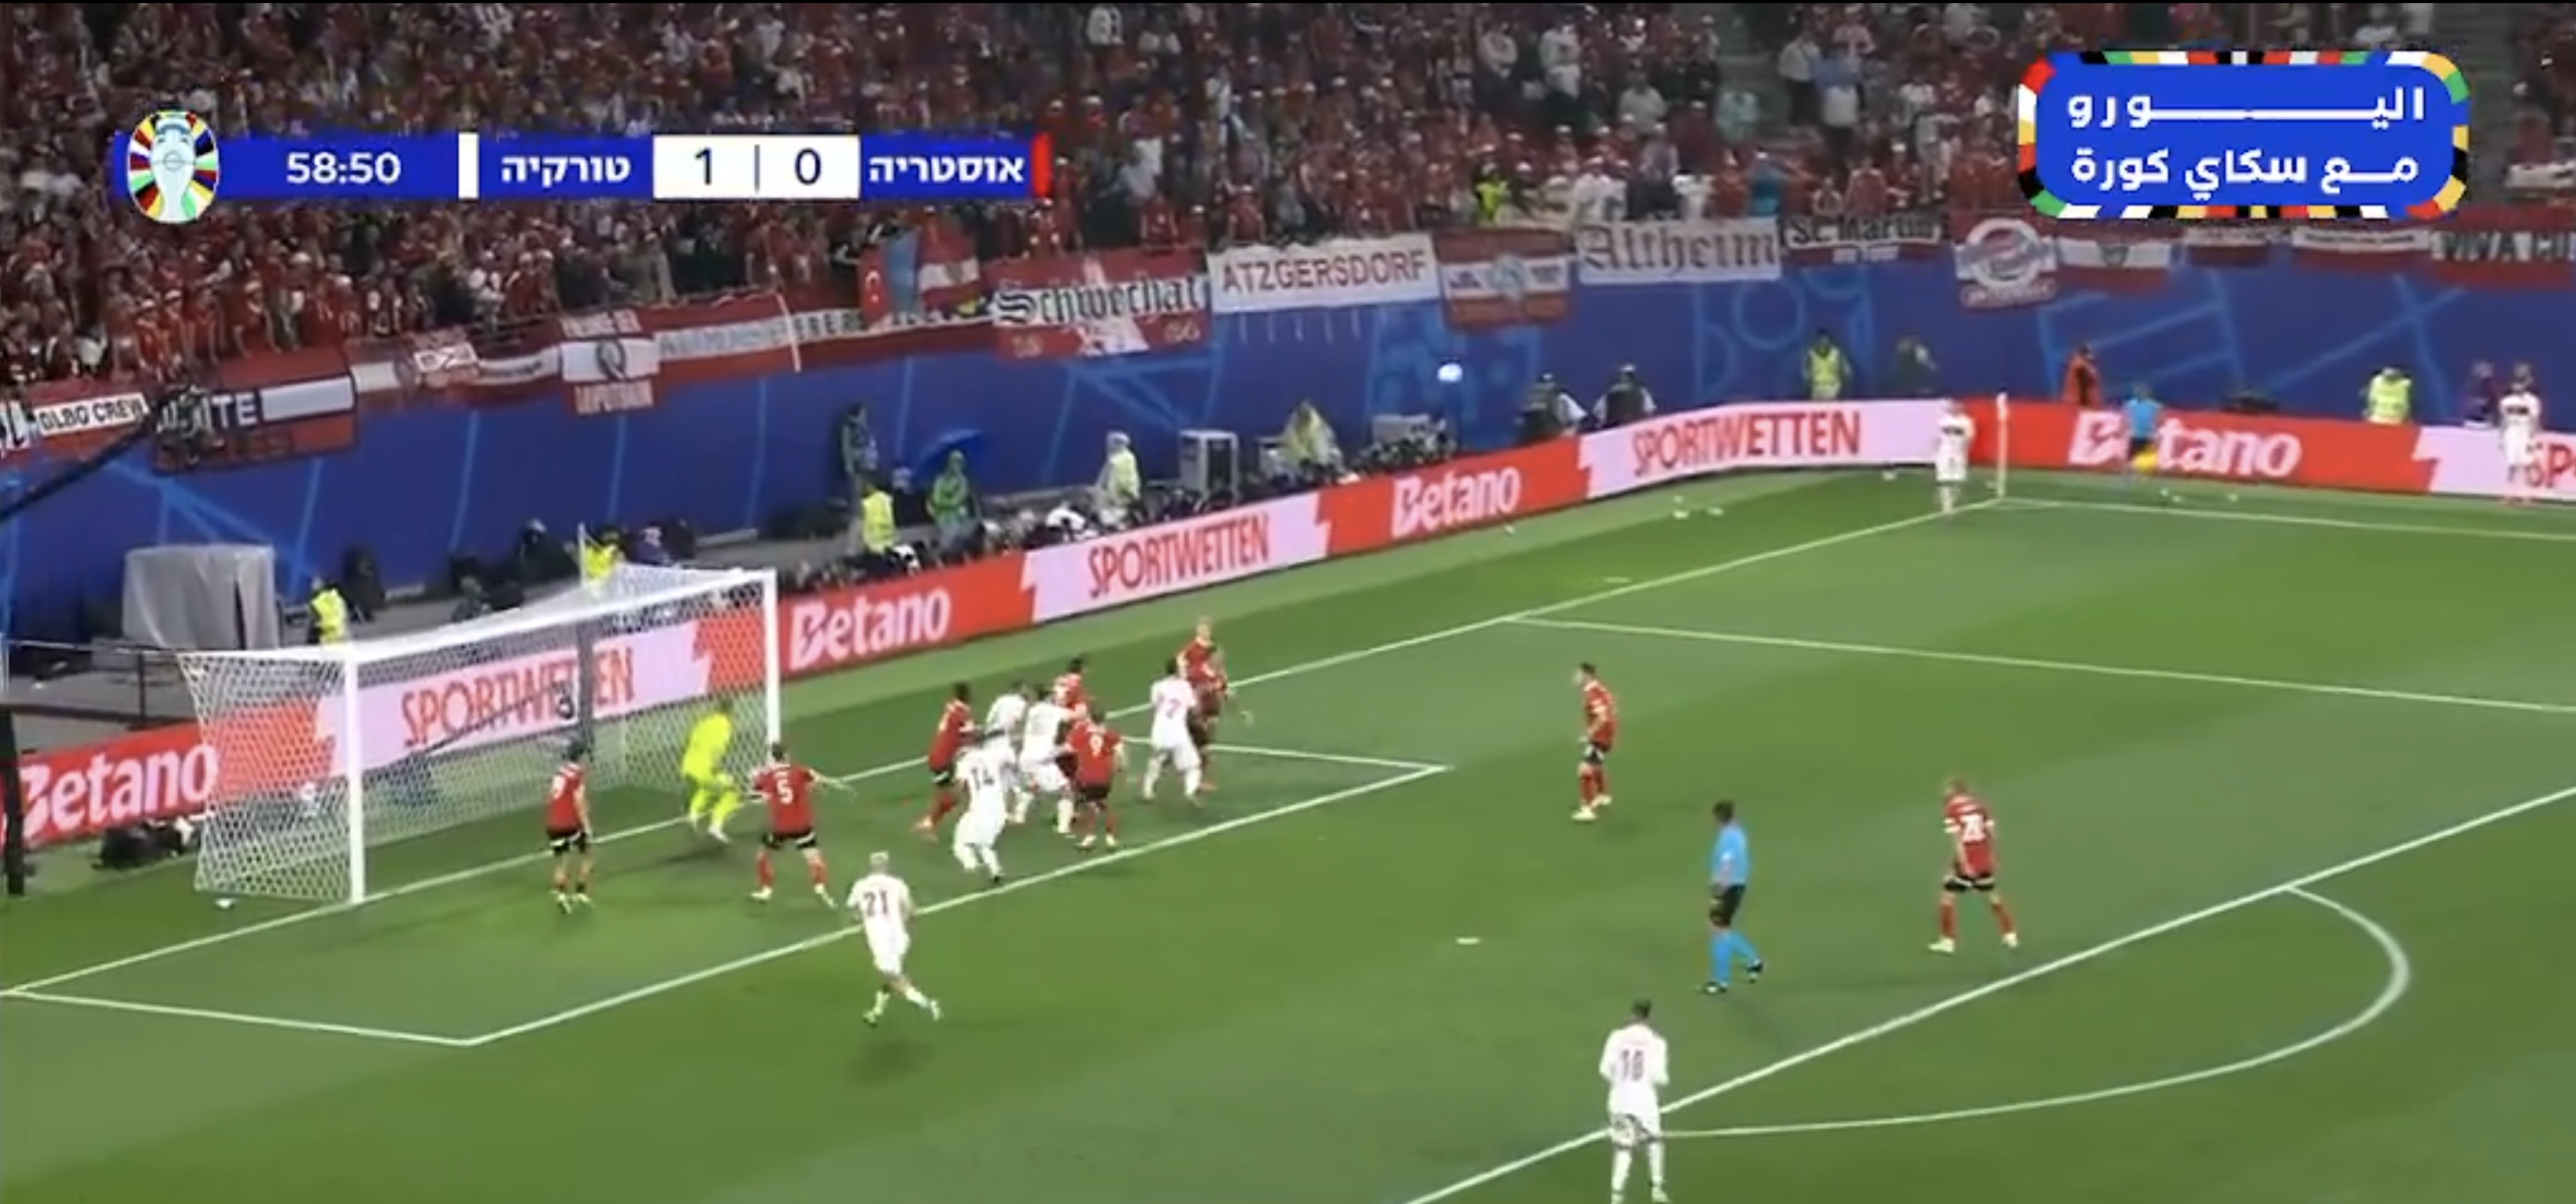 (Video) Merih Demiral at the double as Turkey increase lead over Austria